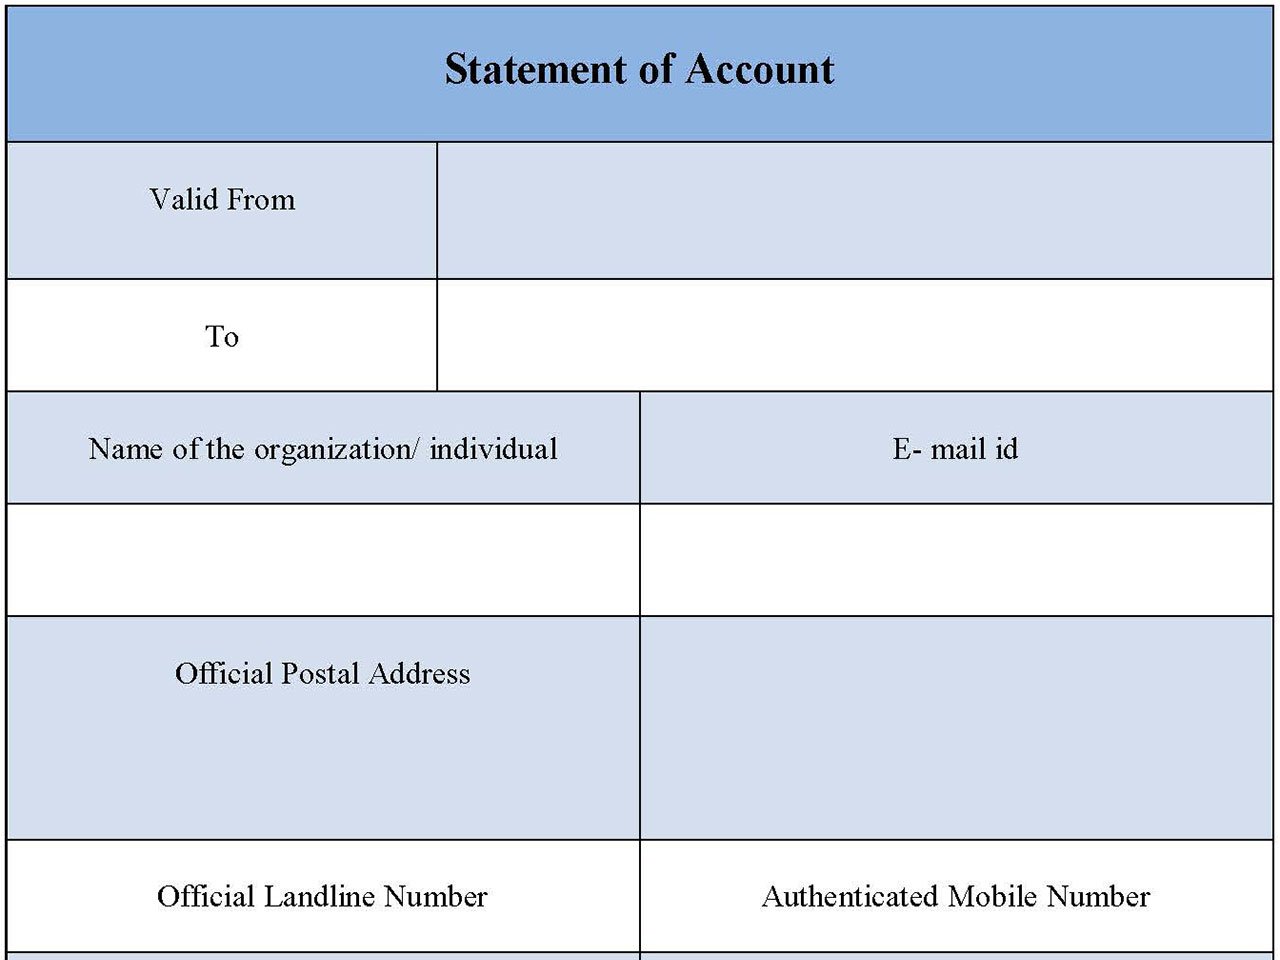 Statement of Account Form